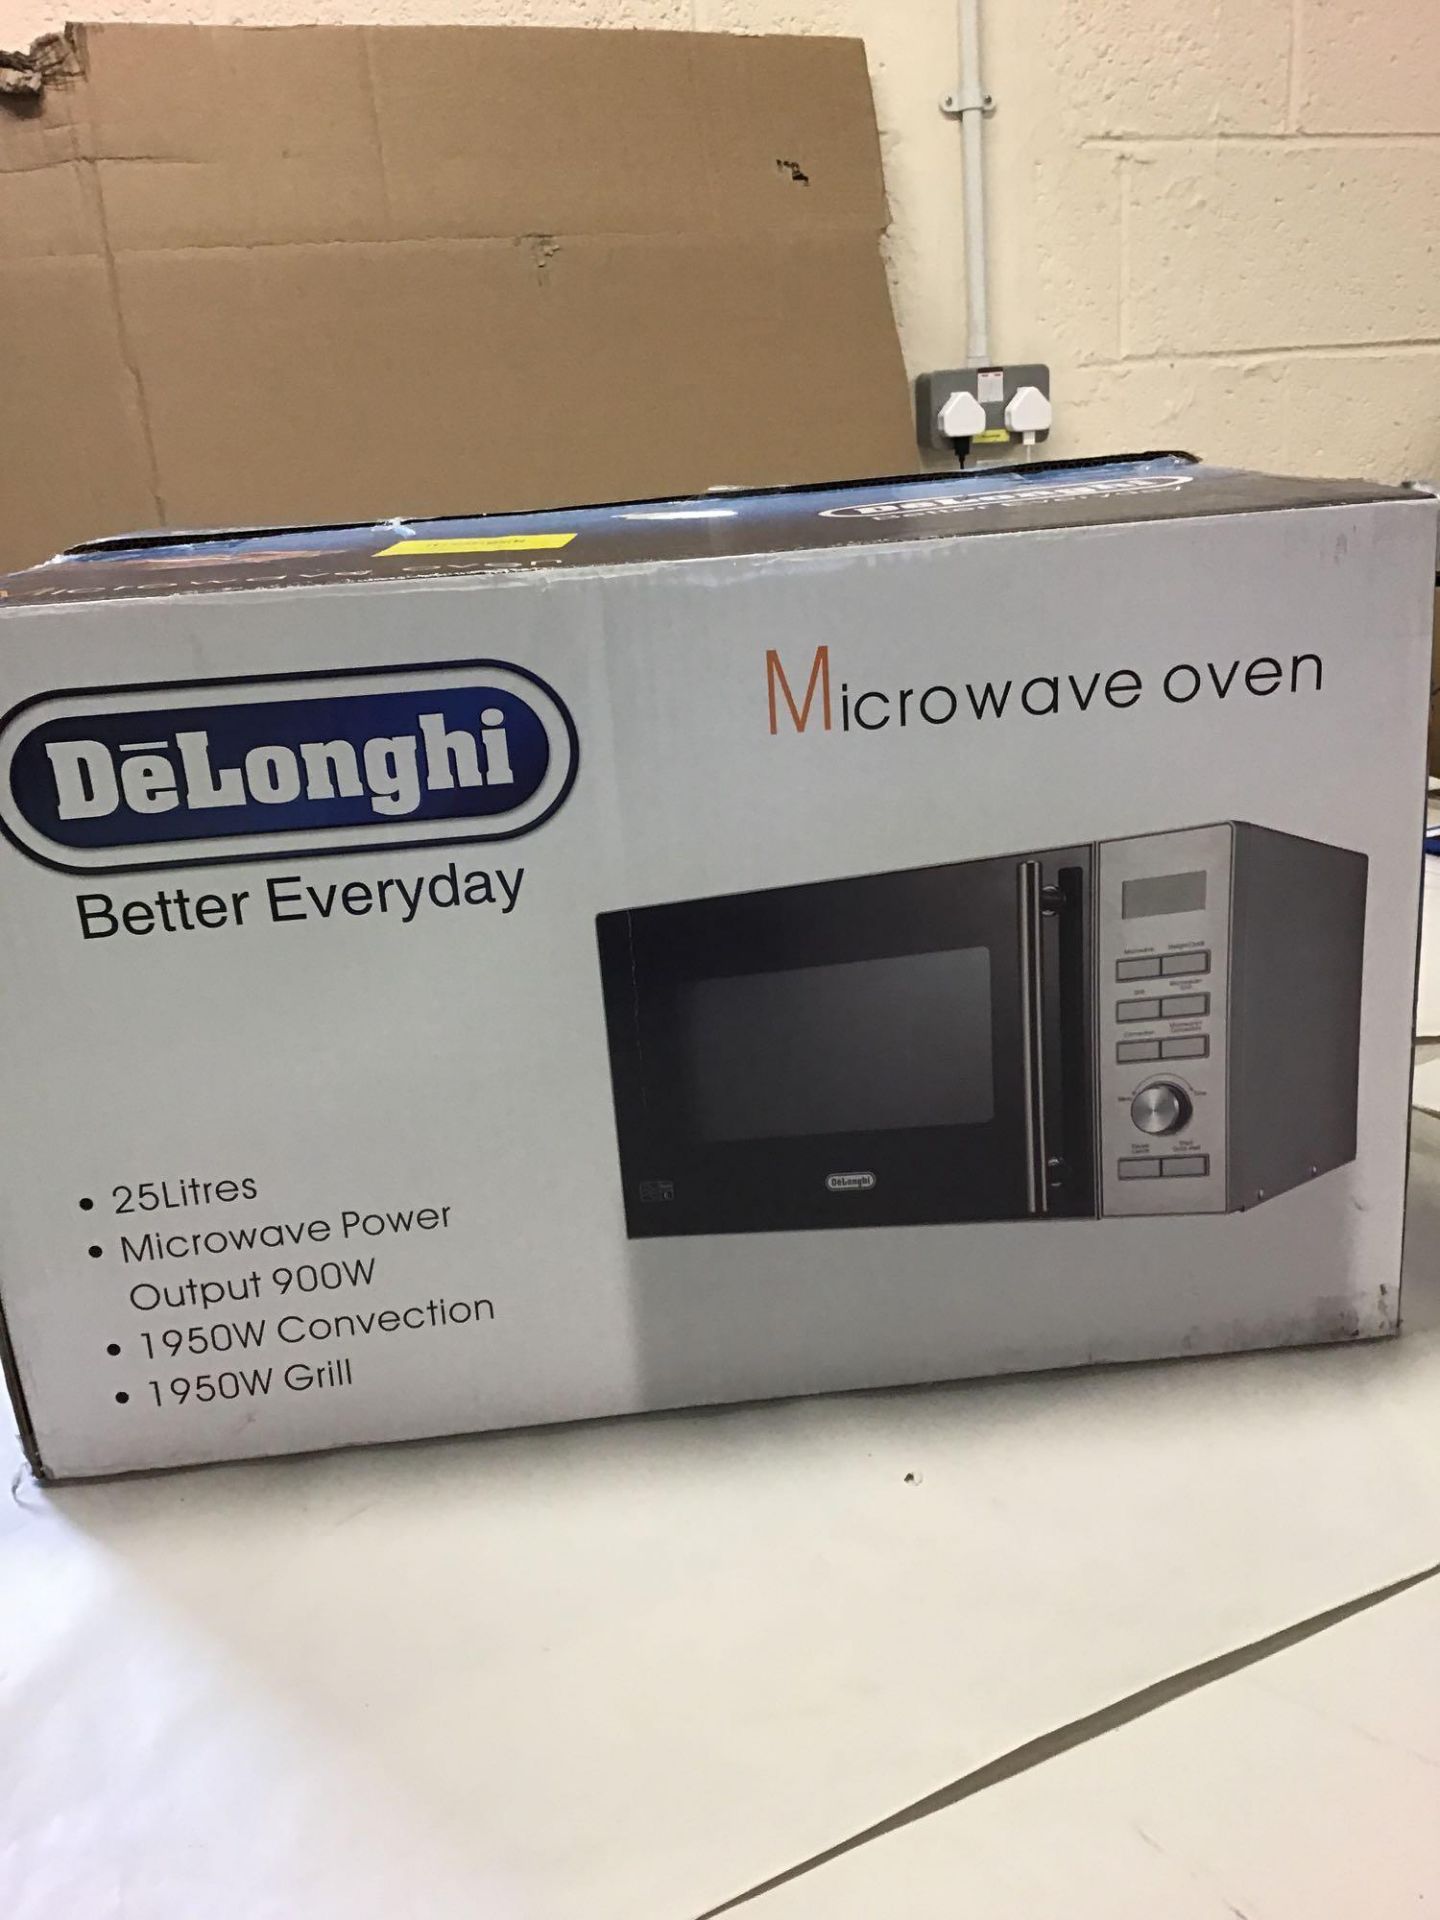 De'Longhi 900W Combination Microwave D90D - Stainless Steel (702/2232) - £124.99 RRP - Image 2 of 4